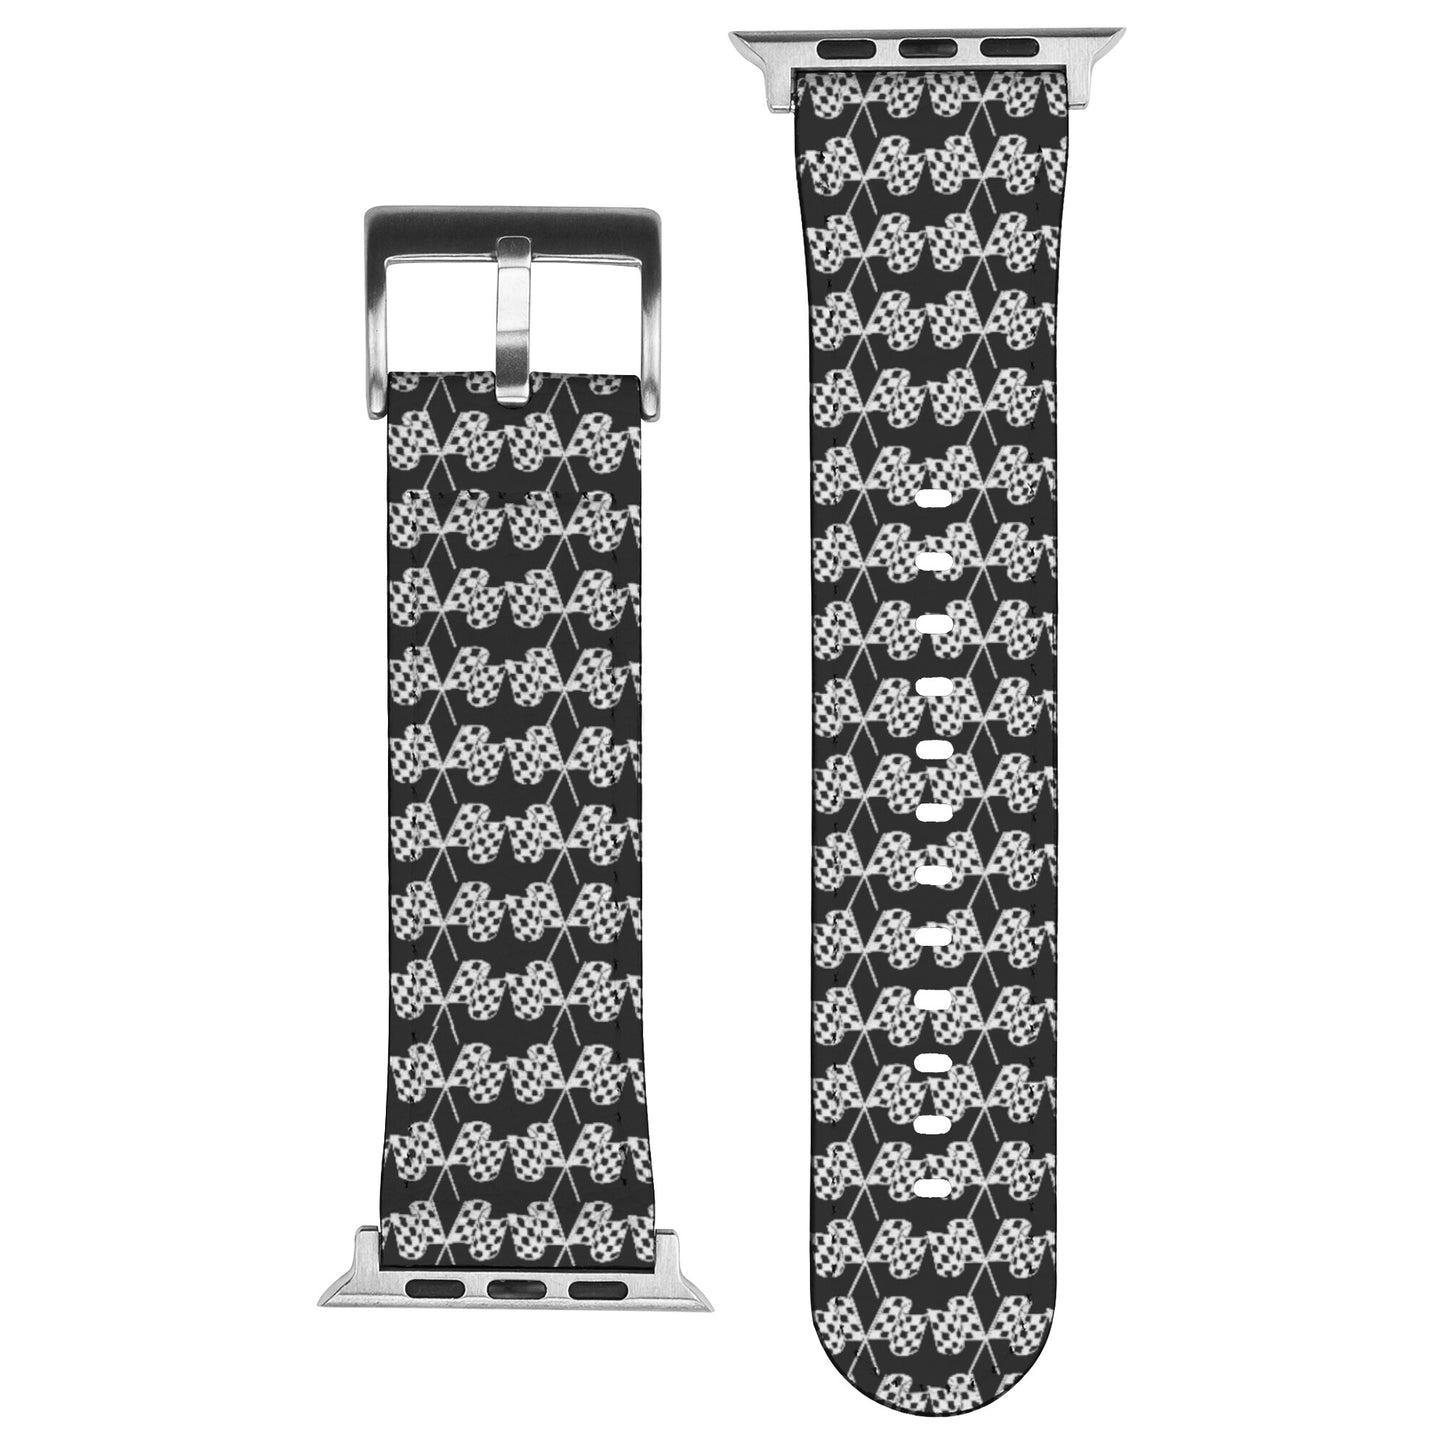 Leather Checkered Flag Pattern Apple Watch Band